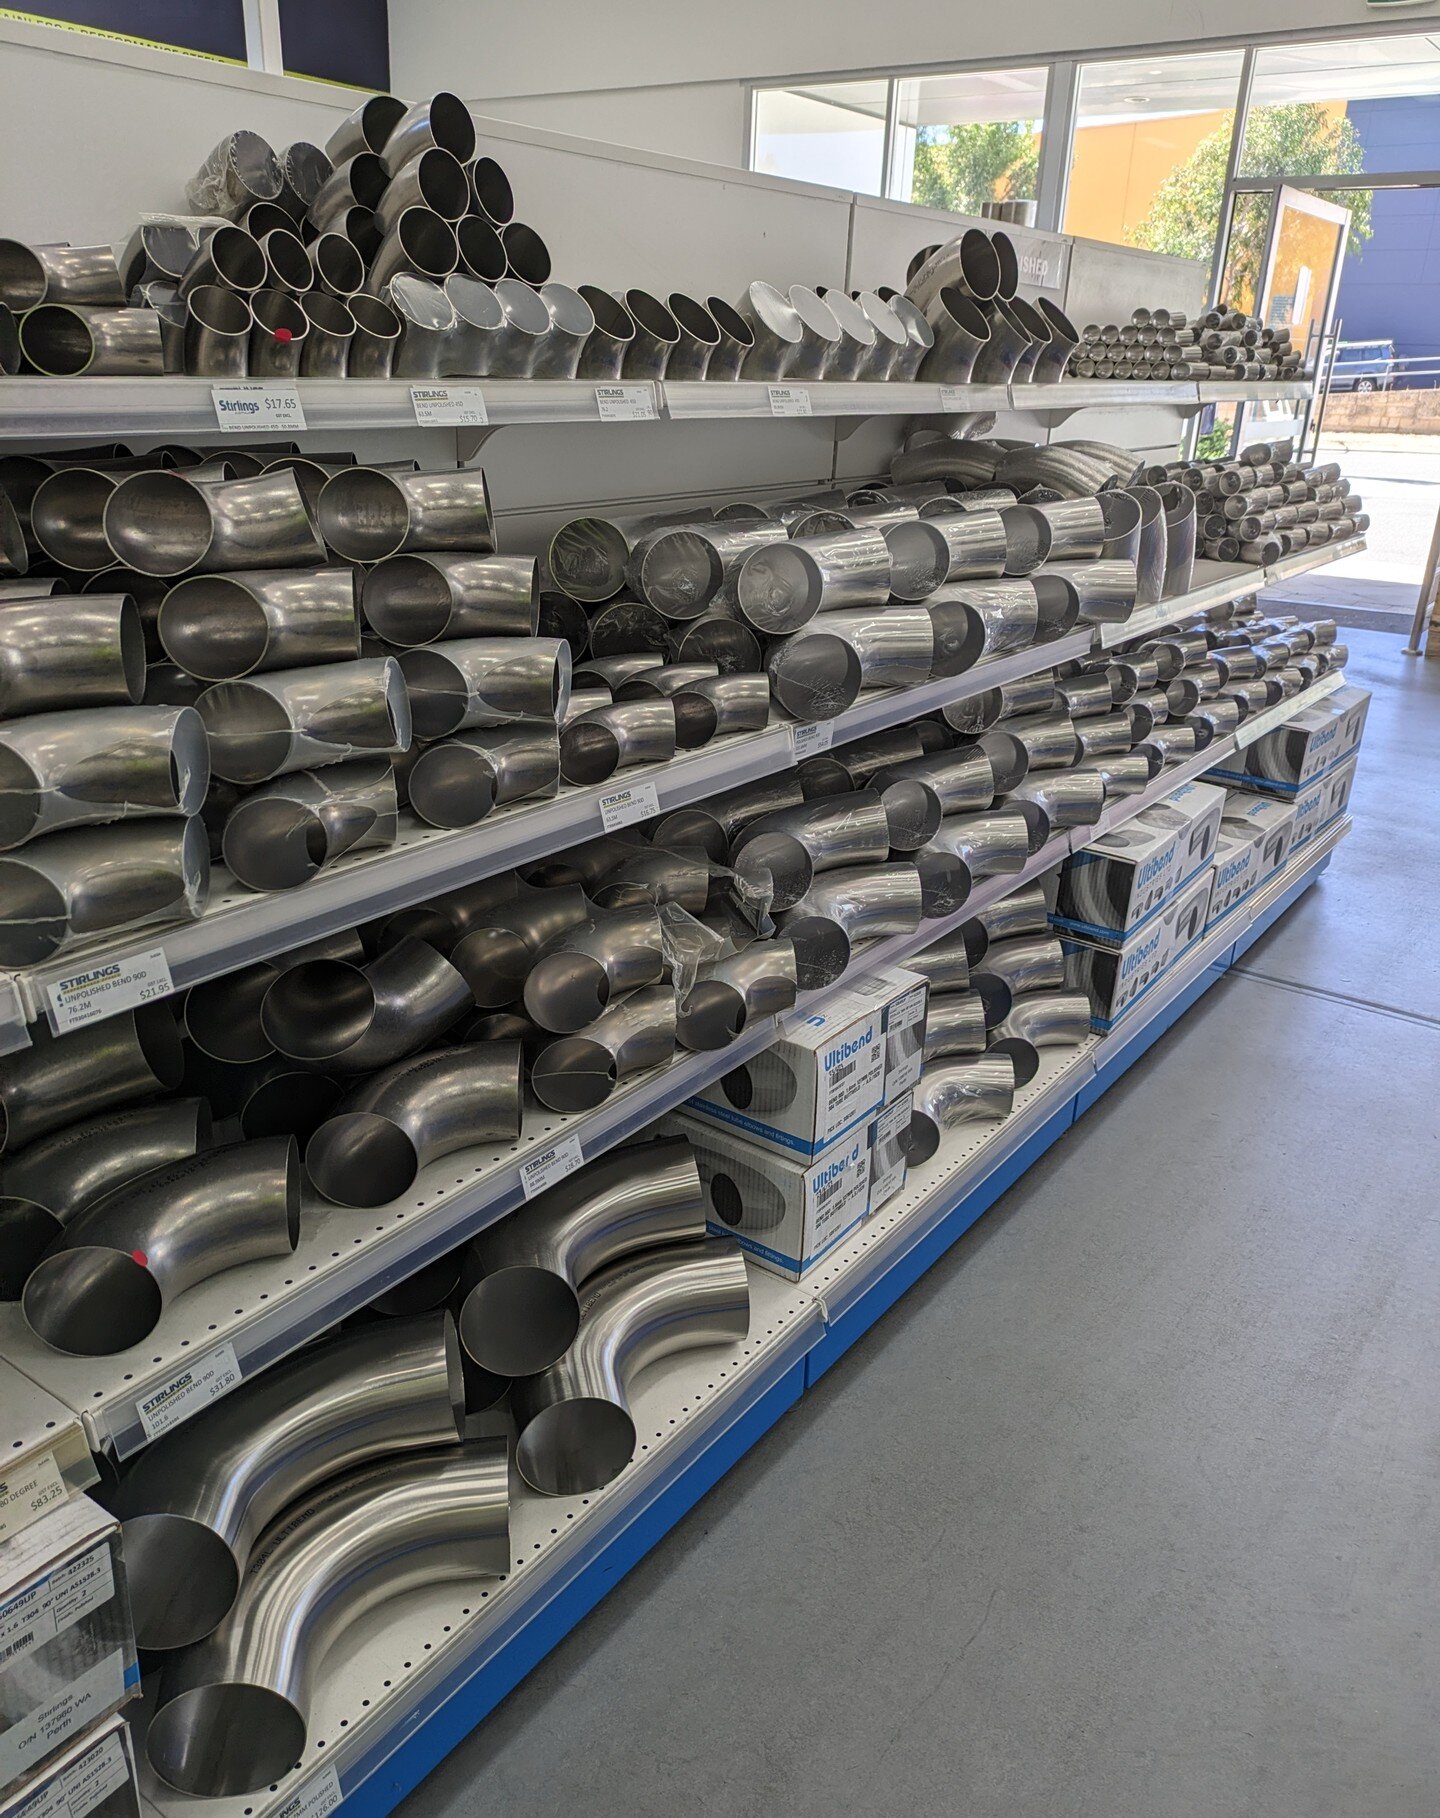 Run don't walk - we're ready for the Christmas rush at our Instore Shops!

Our shelves are stacked with the newest &amp; shiniest Stainless steel products ready for your end of year and 2024 projects.

We not only have Instore Shops in Tassie and W.A